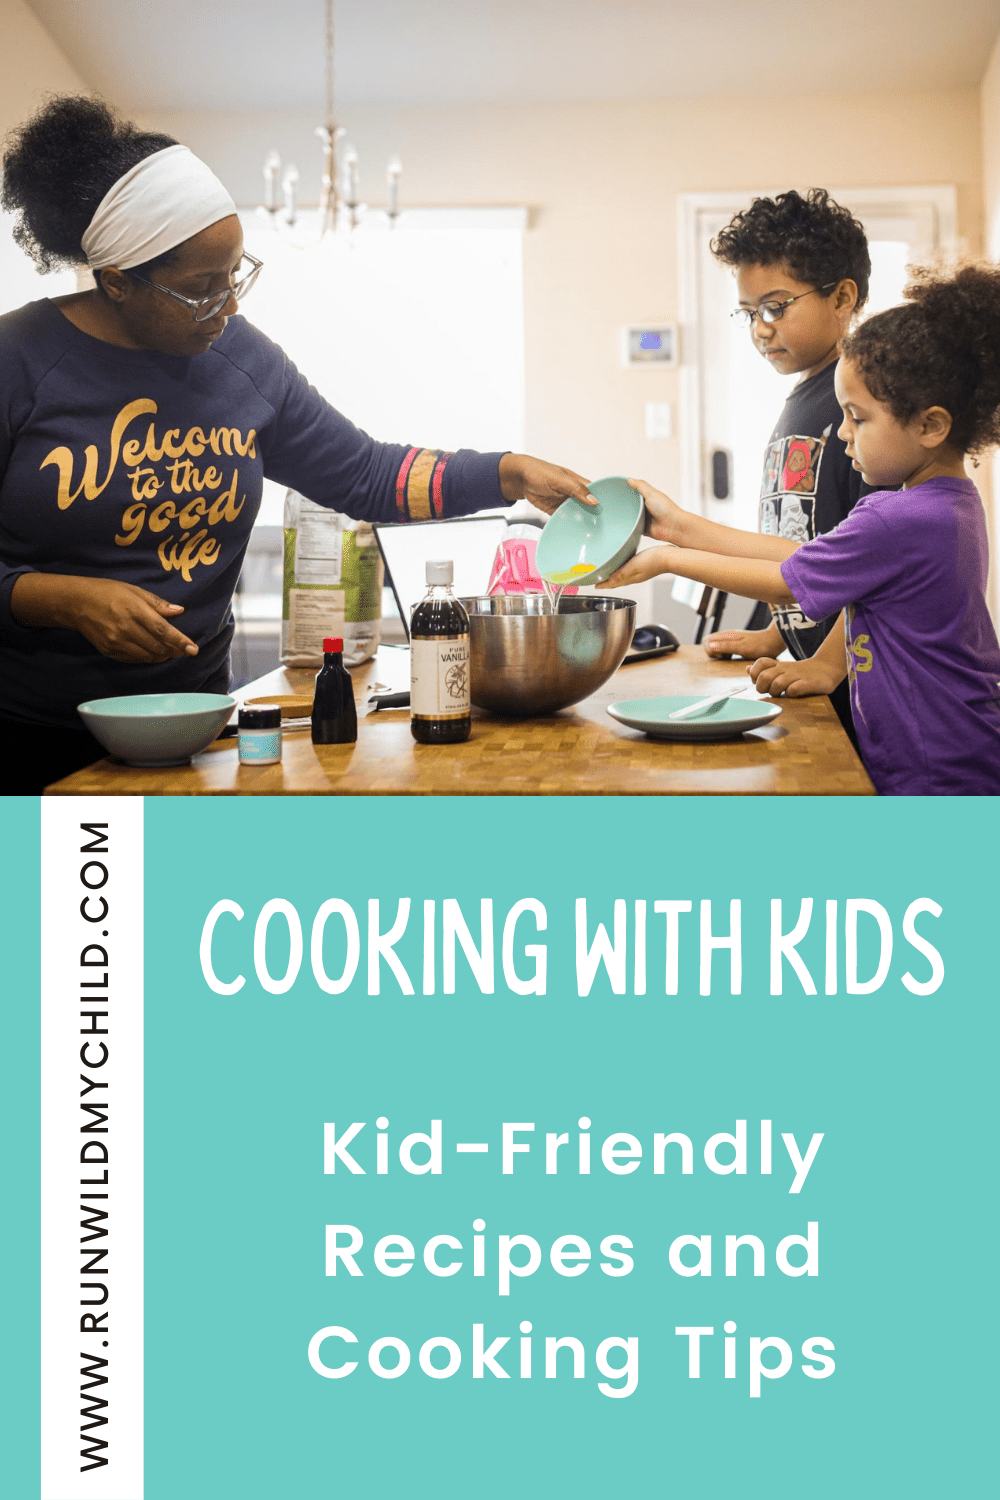 Cooking with Kids: 25+ Recipes To Make With Your Kids